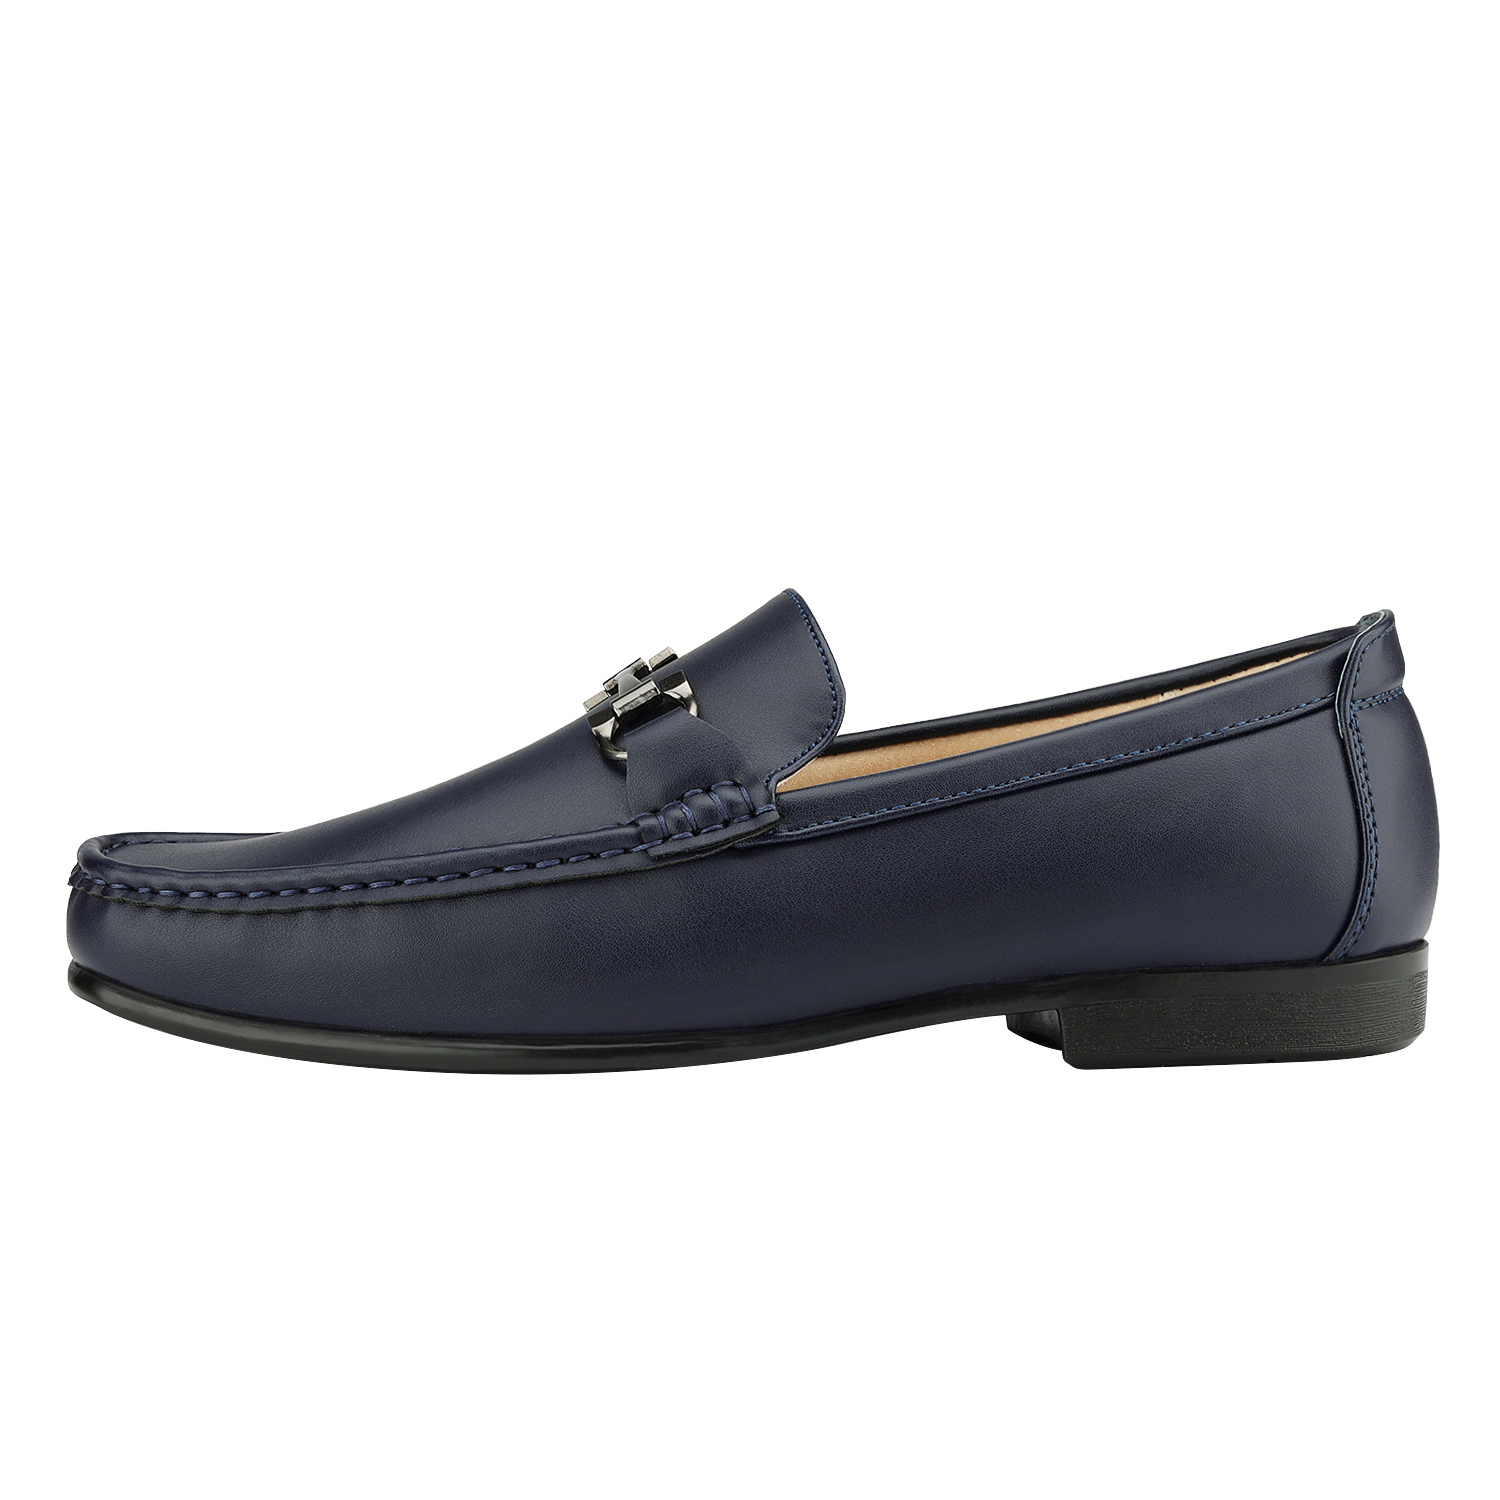 Bruno Marc Men's Moccasin Loafer Shoes Men Dress Loafers Slip On Casual Penny Comfort Outdoor Loafers HENRY-1 NAVY Size 9.5 - image 4 of 5